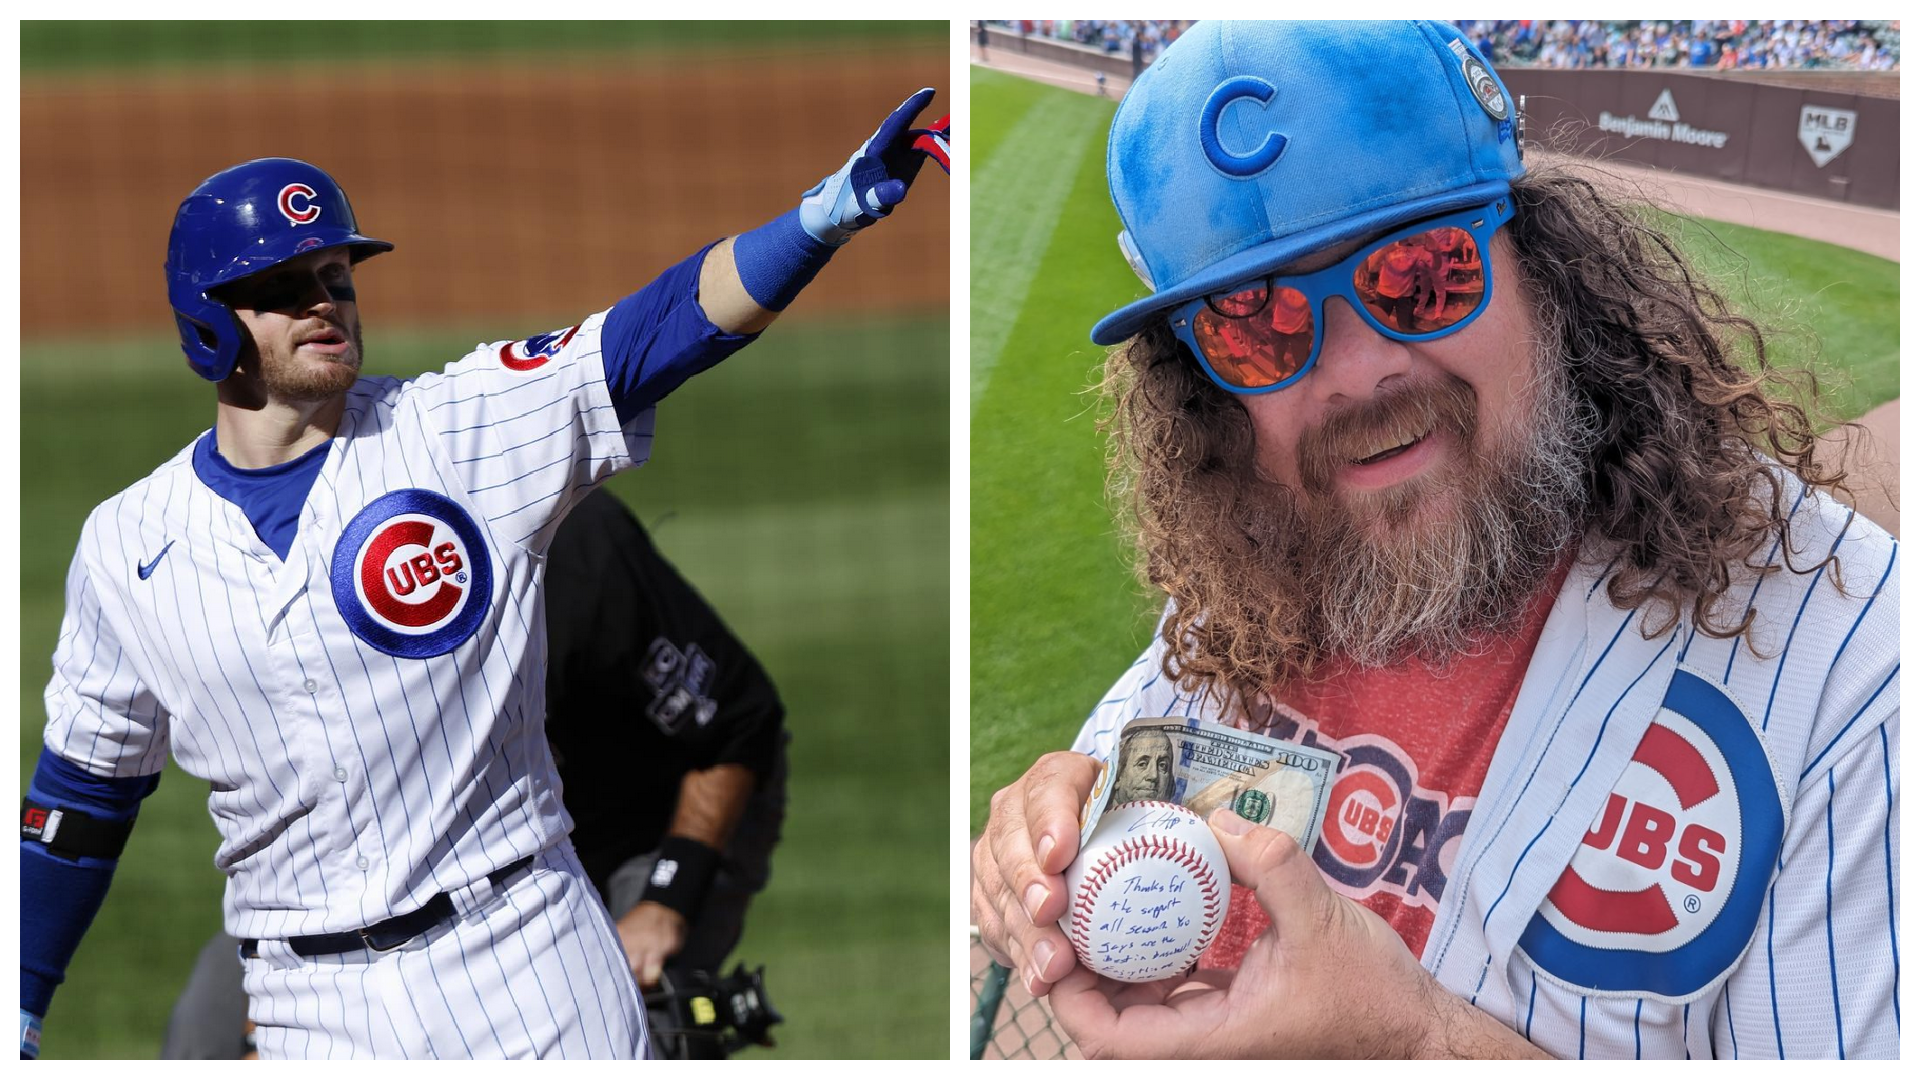 MLB on X: For the ivy. For Wrigleyville. For #All77 of Chicago's